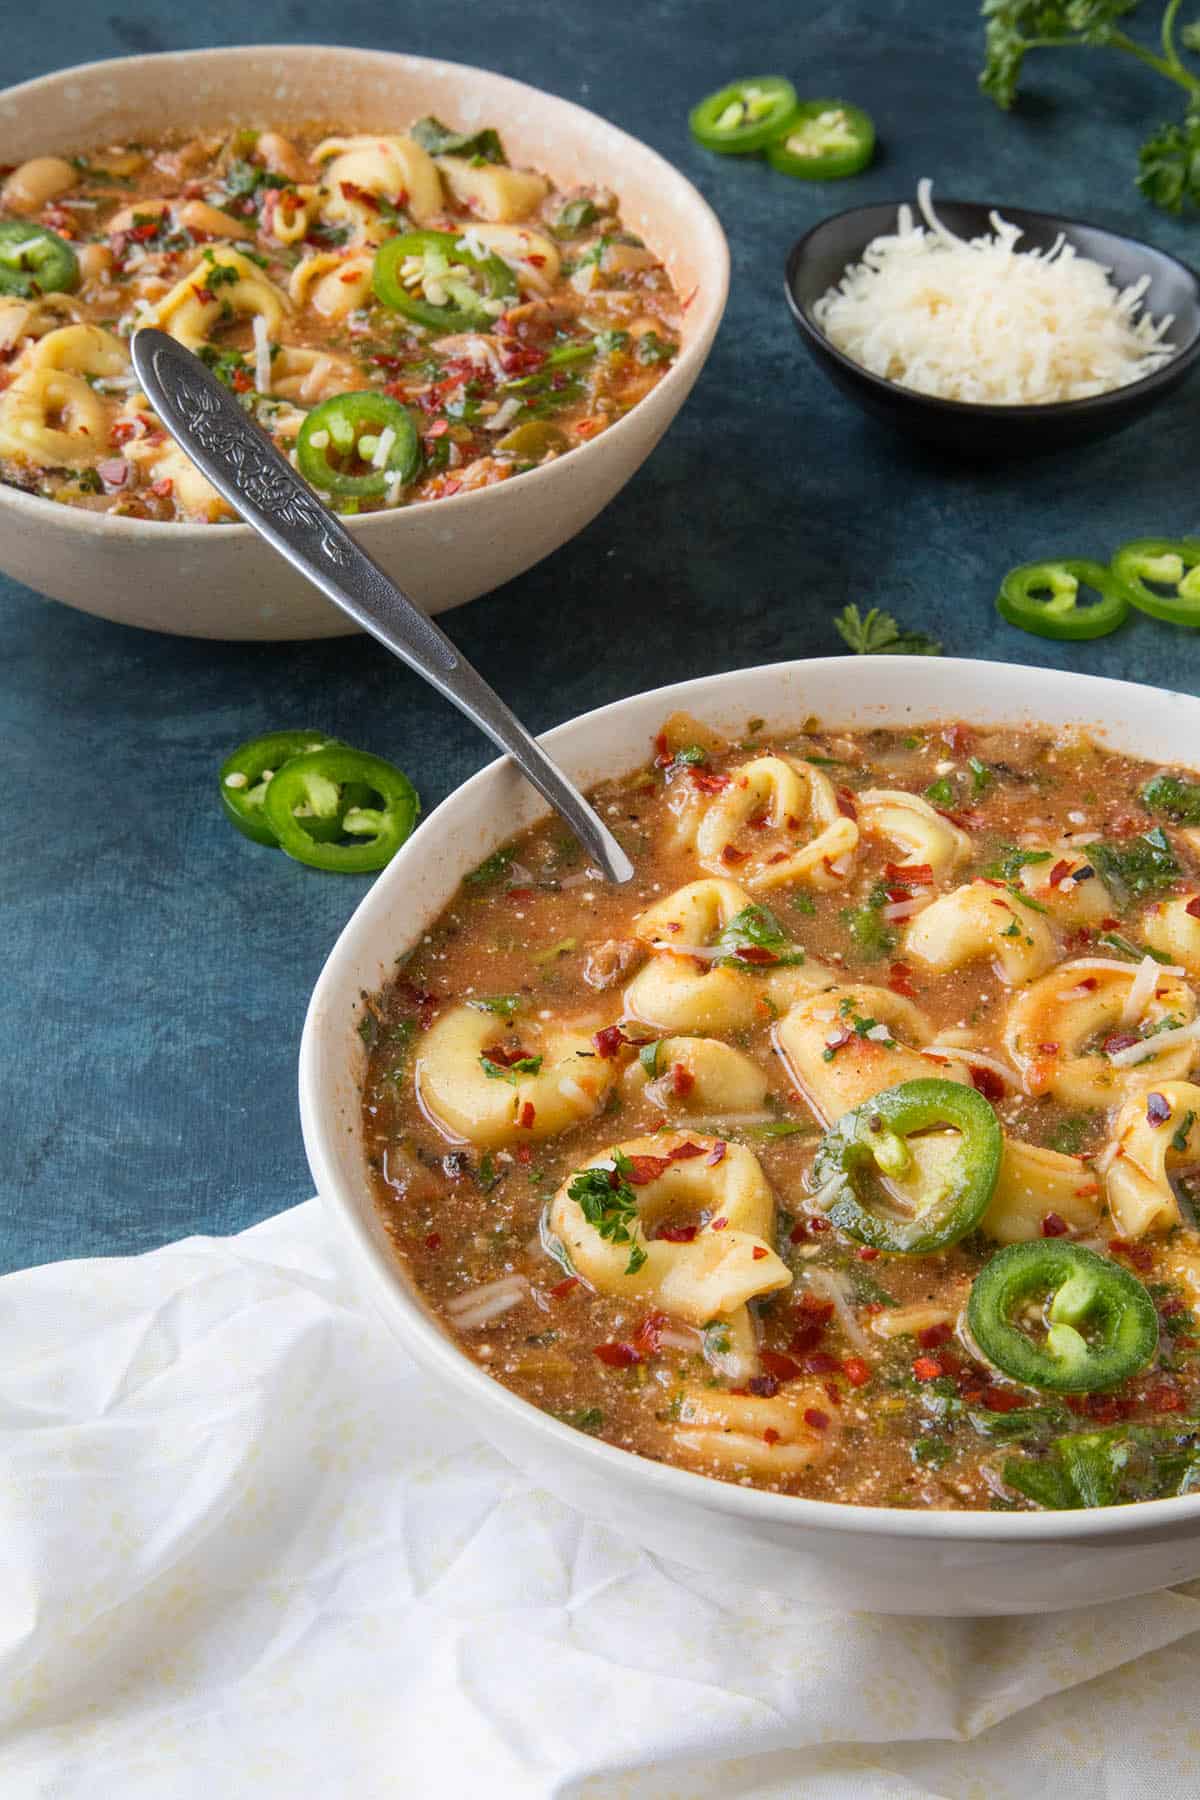 Zesty Chicken Tortellini Soup - Grab Yourself a Bowl